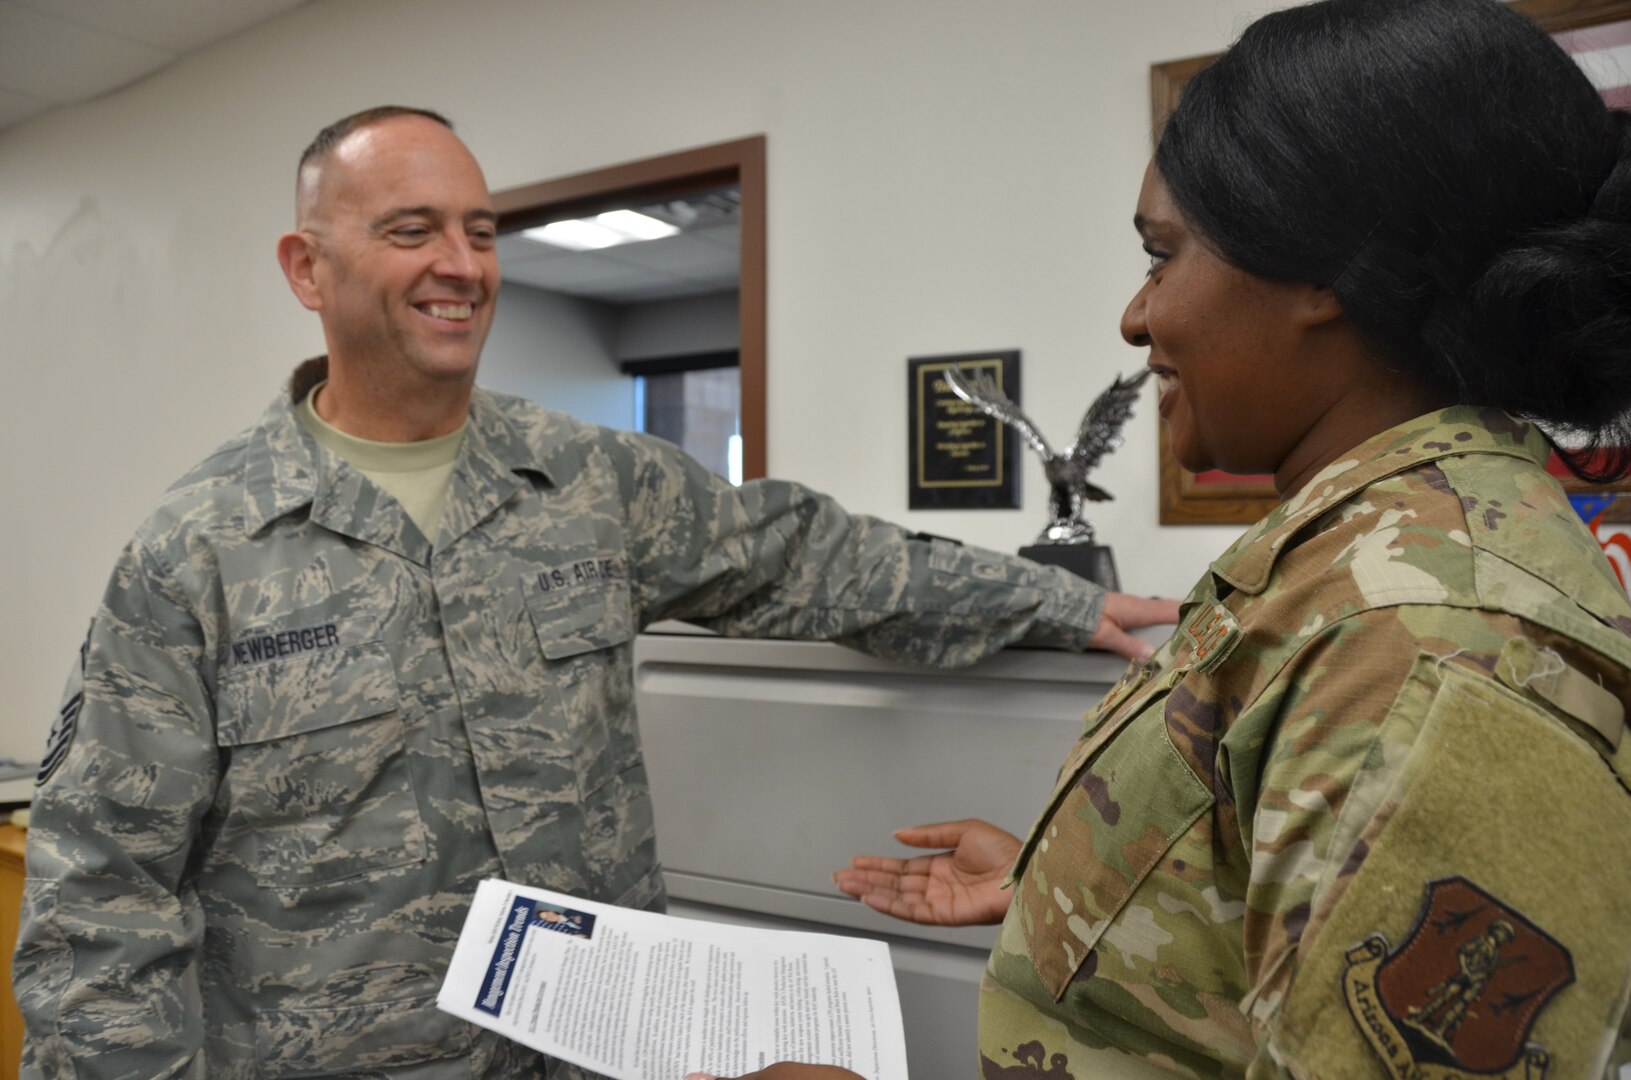 Senior Master Sgt. Scott Newberger and Staff Sgt. Victoria Linder of the 161st Air Refueling Wing's Diversity and Inclusion Council discuss strategy on upcoming meetings in Phoenix, Ariz., Nov. 2, 2019.